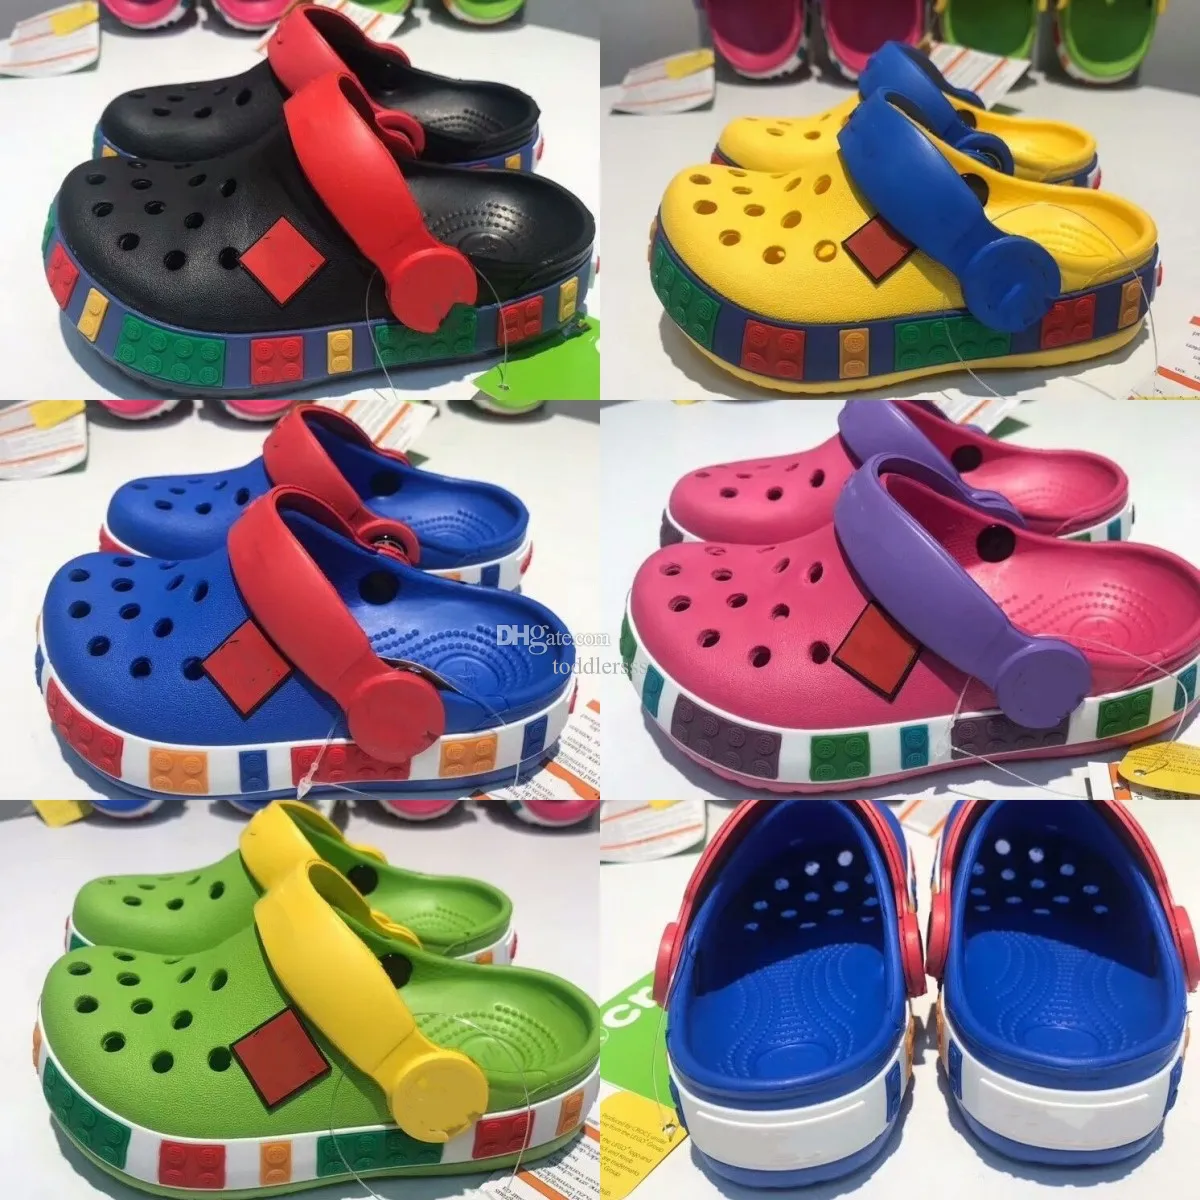 Kids Sandals Designer Toddlers Hole Slippers Clog Boys Girls Beach Shoes Casual Summer Youth Children Slides Buckle croos classic Home Garden Bla m9gE#